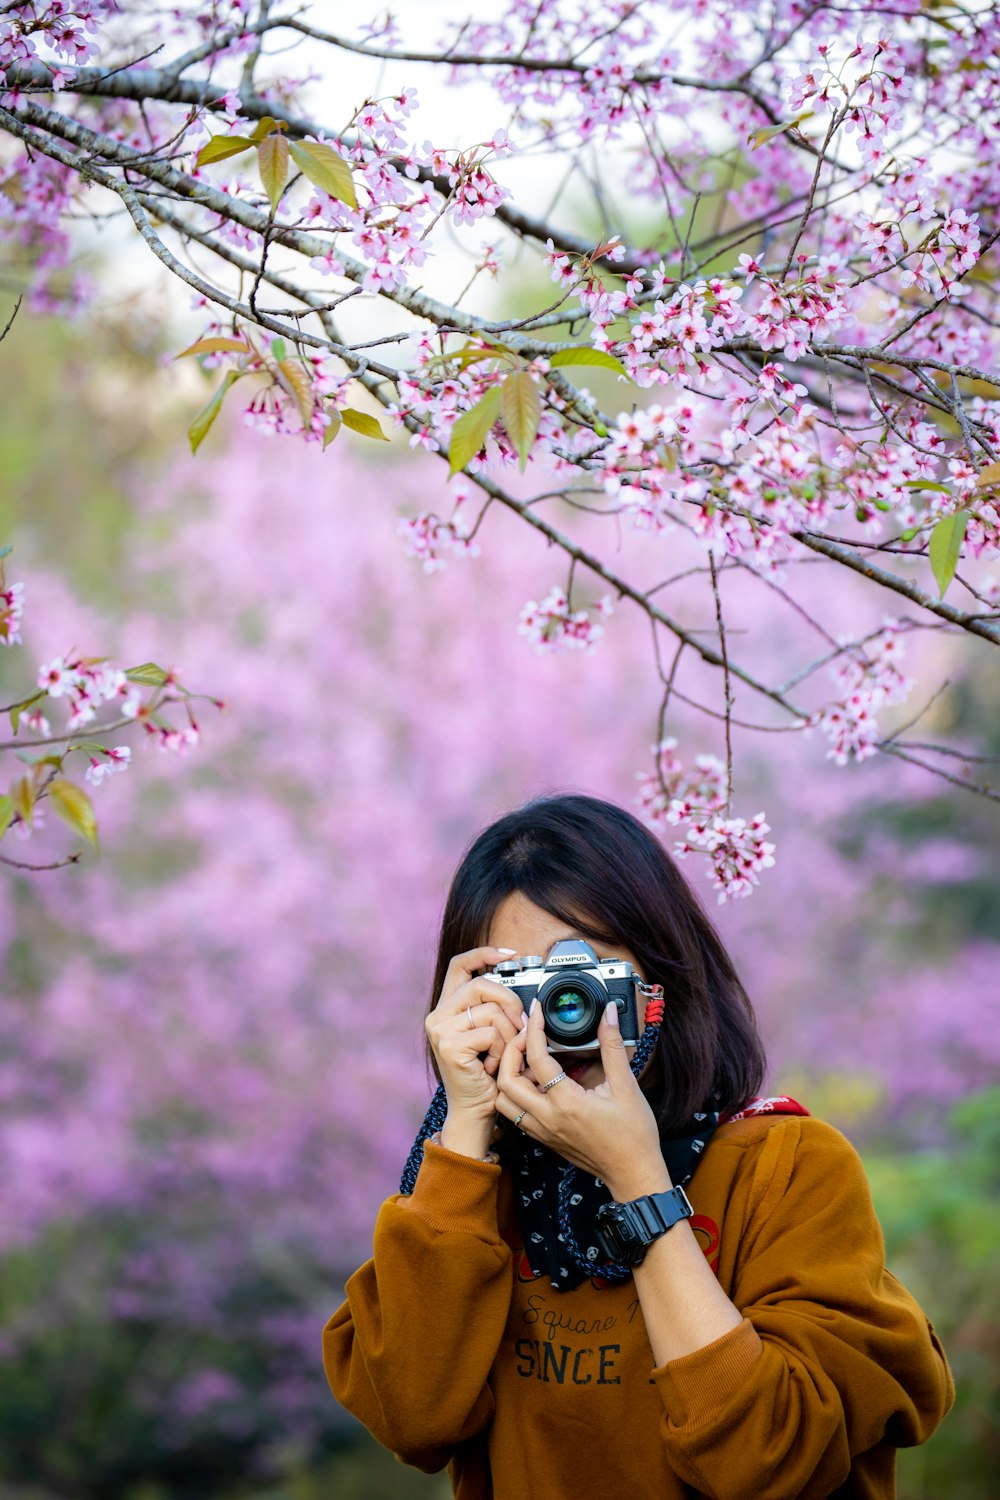 woman in orange jacket taking photo of pink cherry blossom